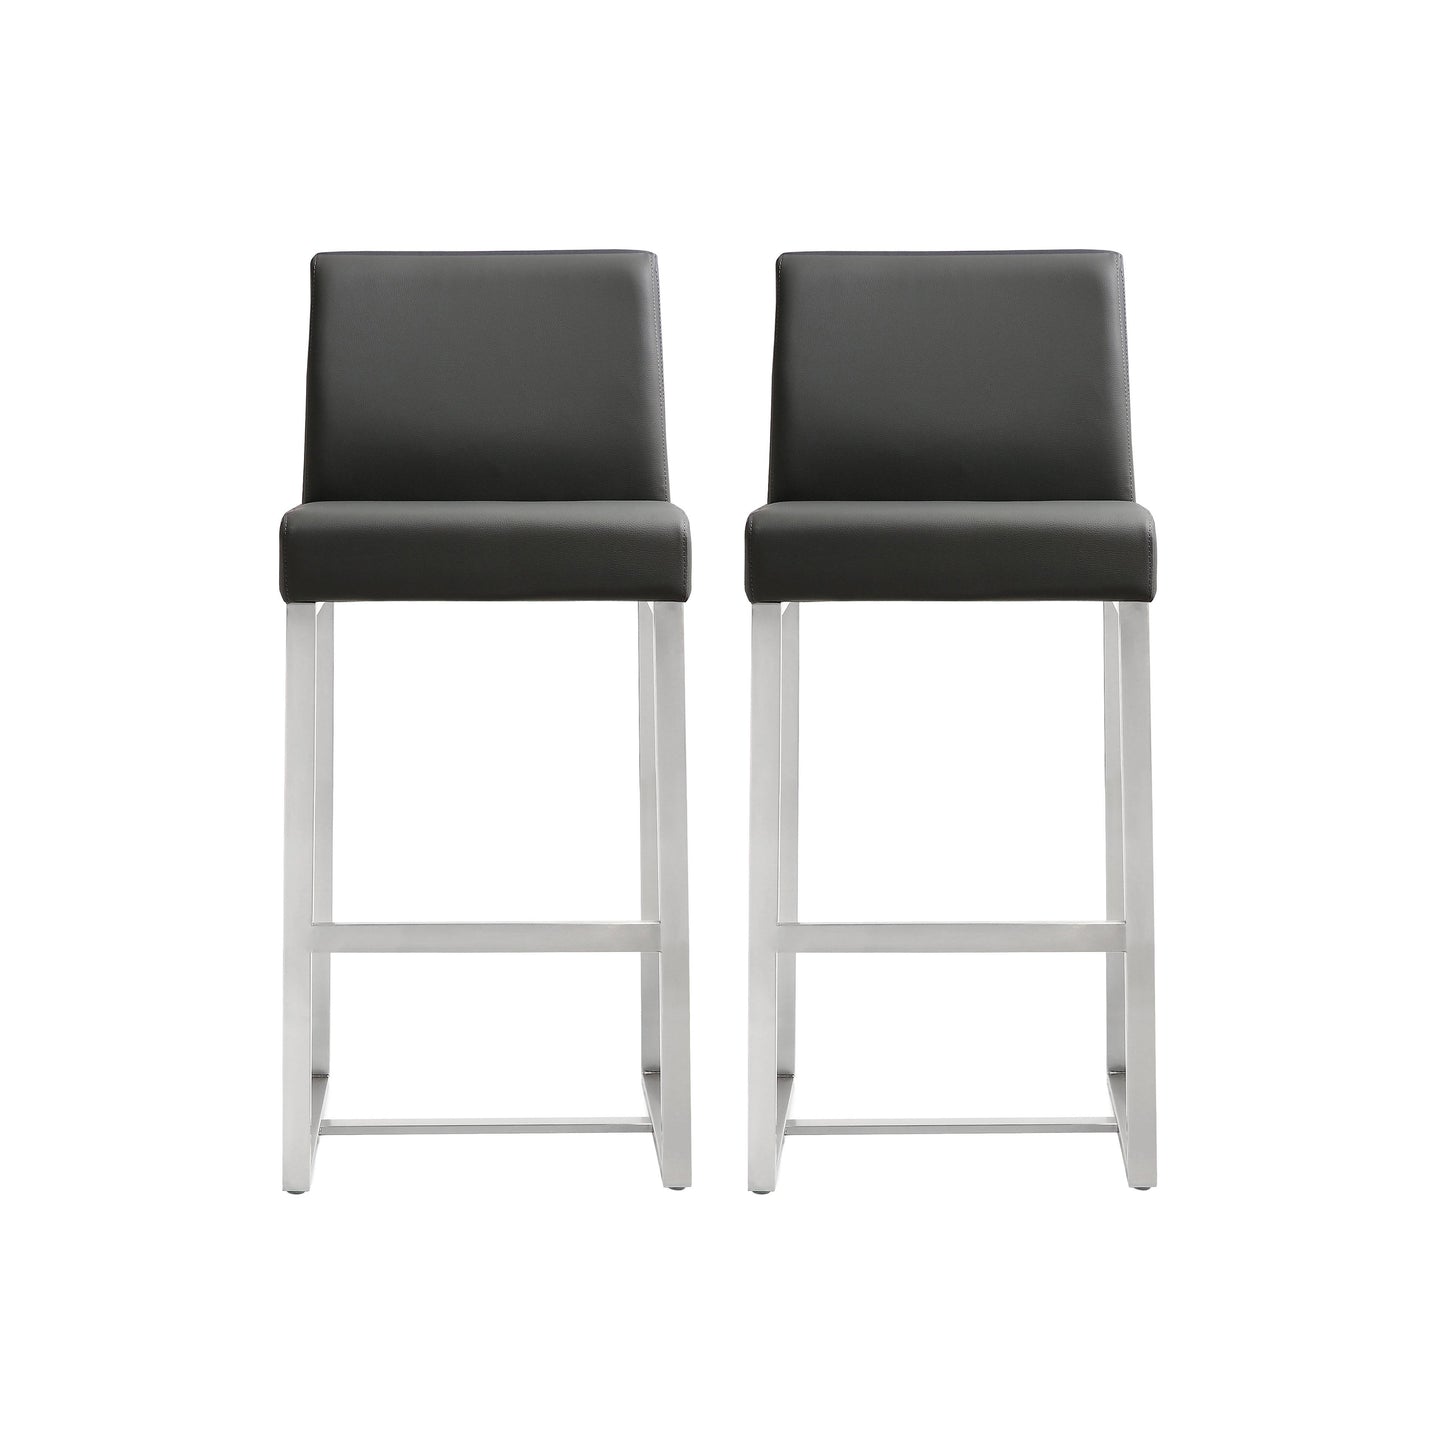 Tov Furniture Denmark Grey Stainless Steel Counter Stool Set of 2